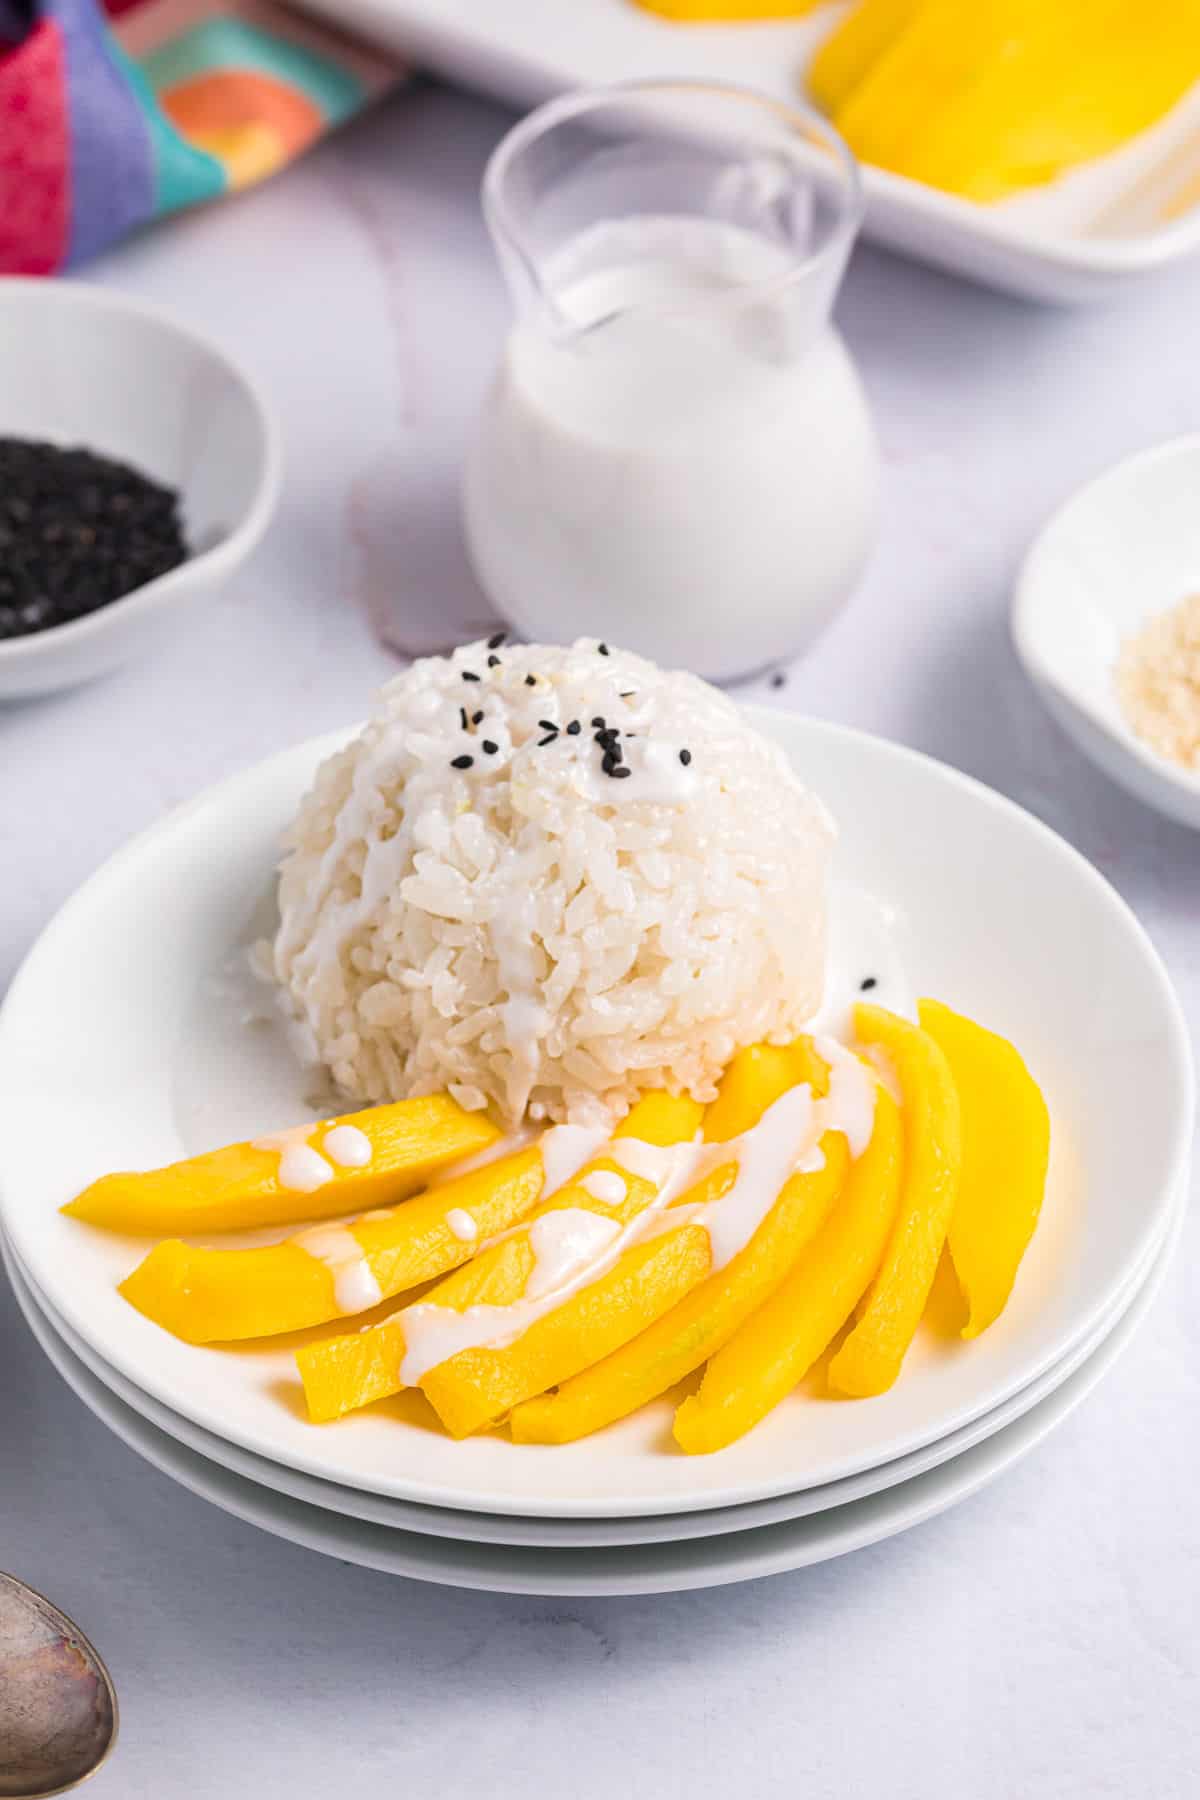 Several slices of mango are placed next to a scoop of white rice.